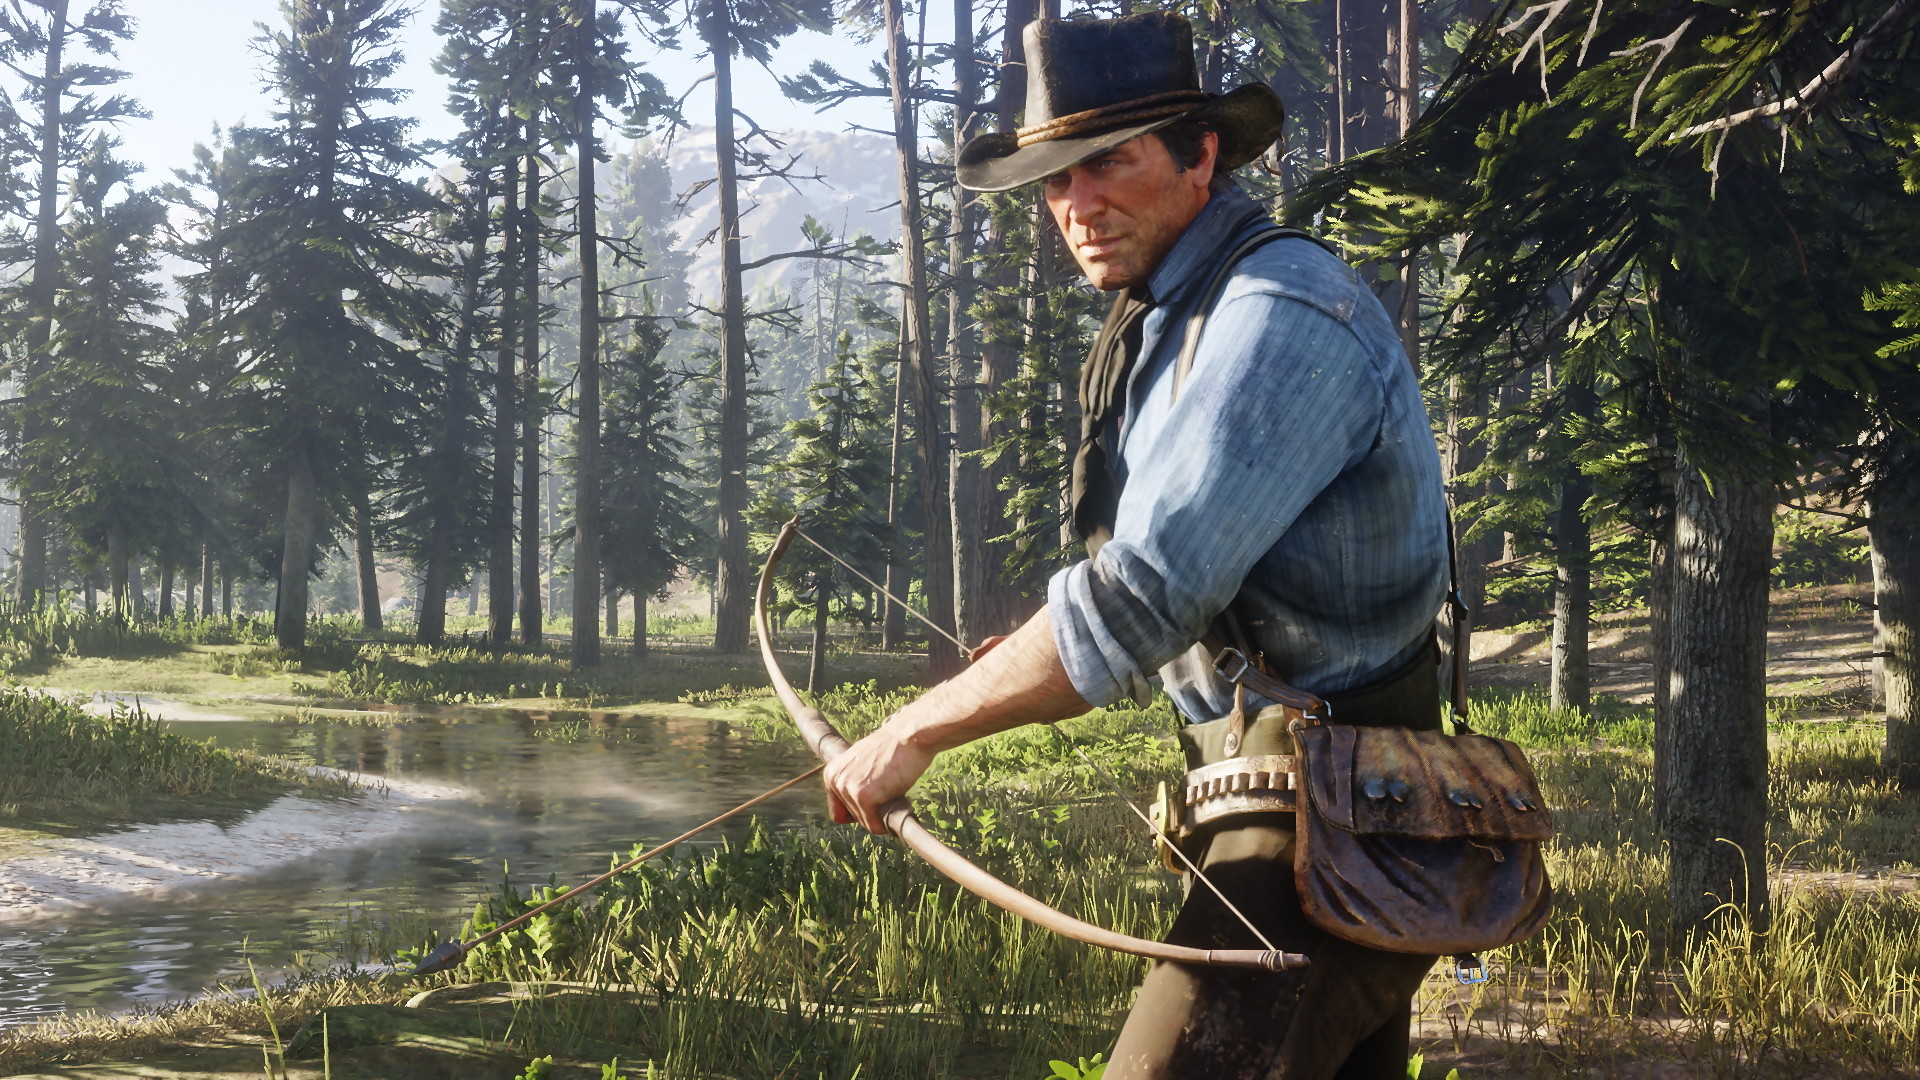 red dead redemption 2 screen everything so far news latest